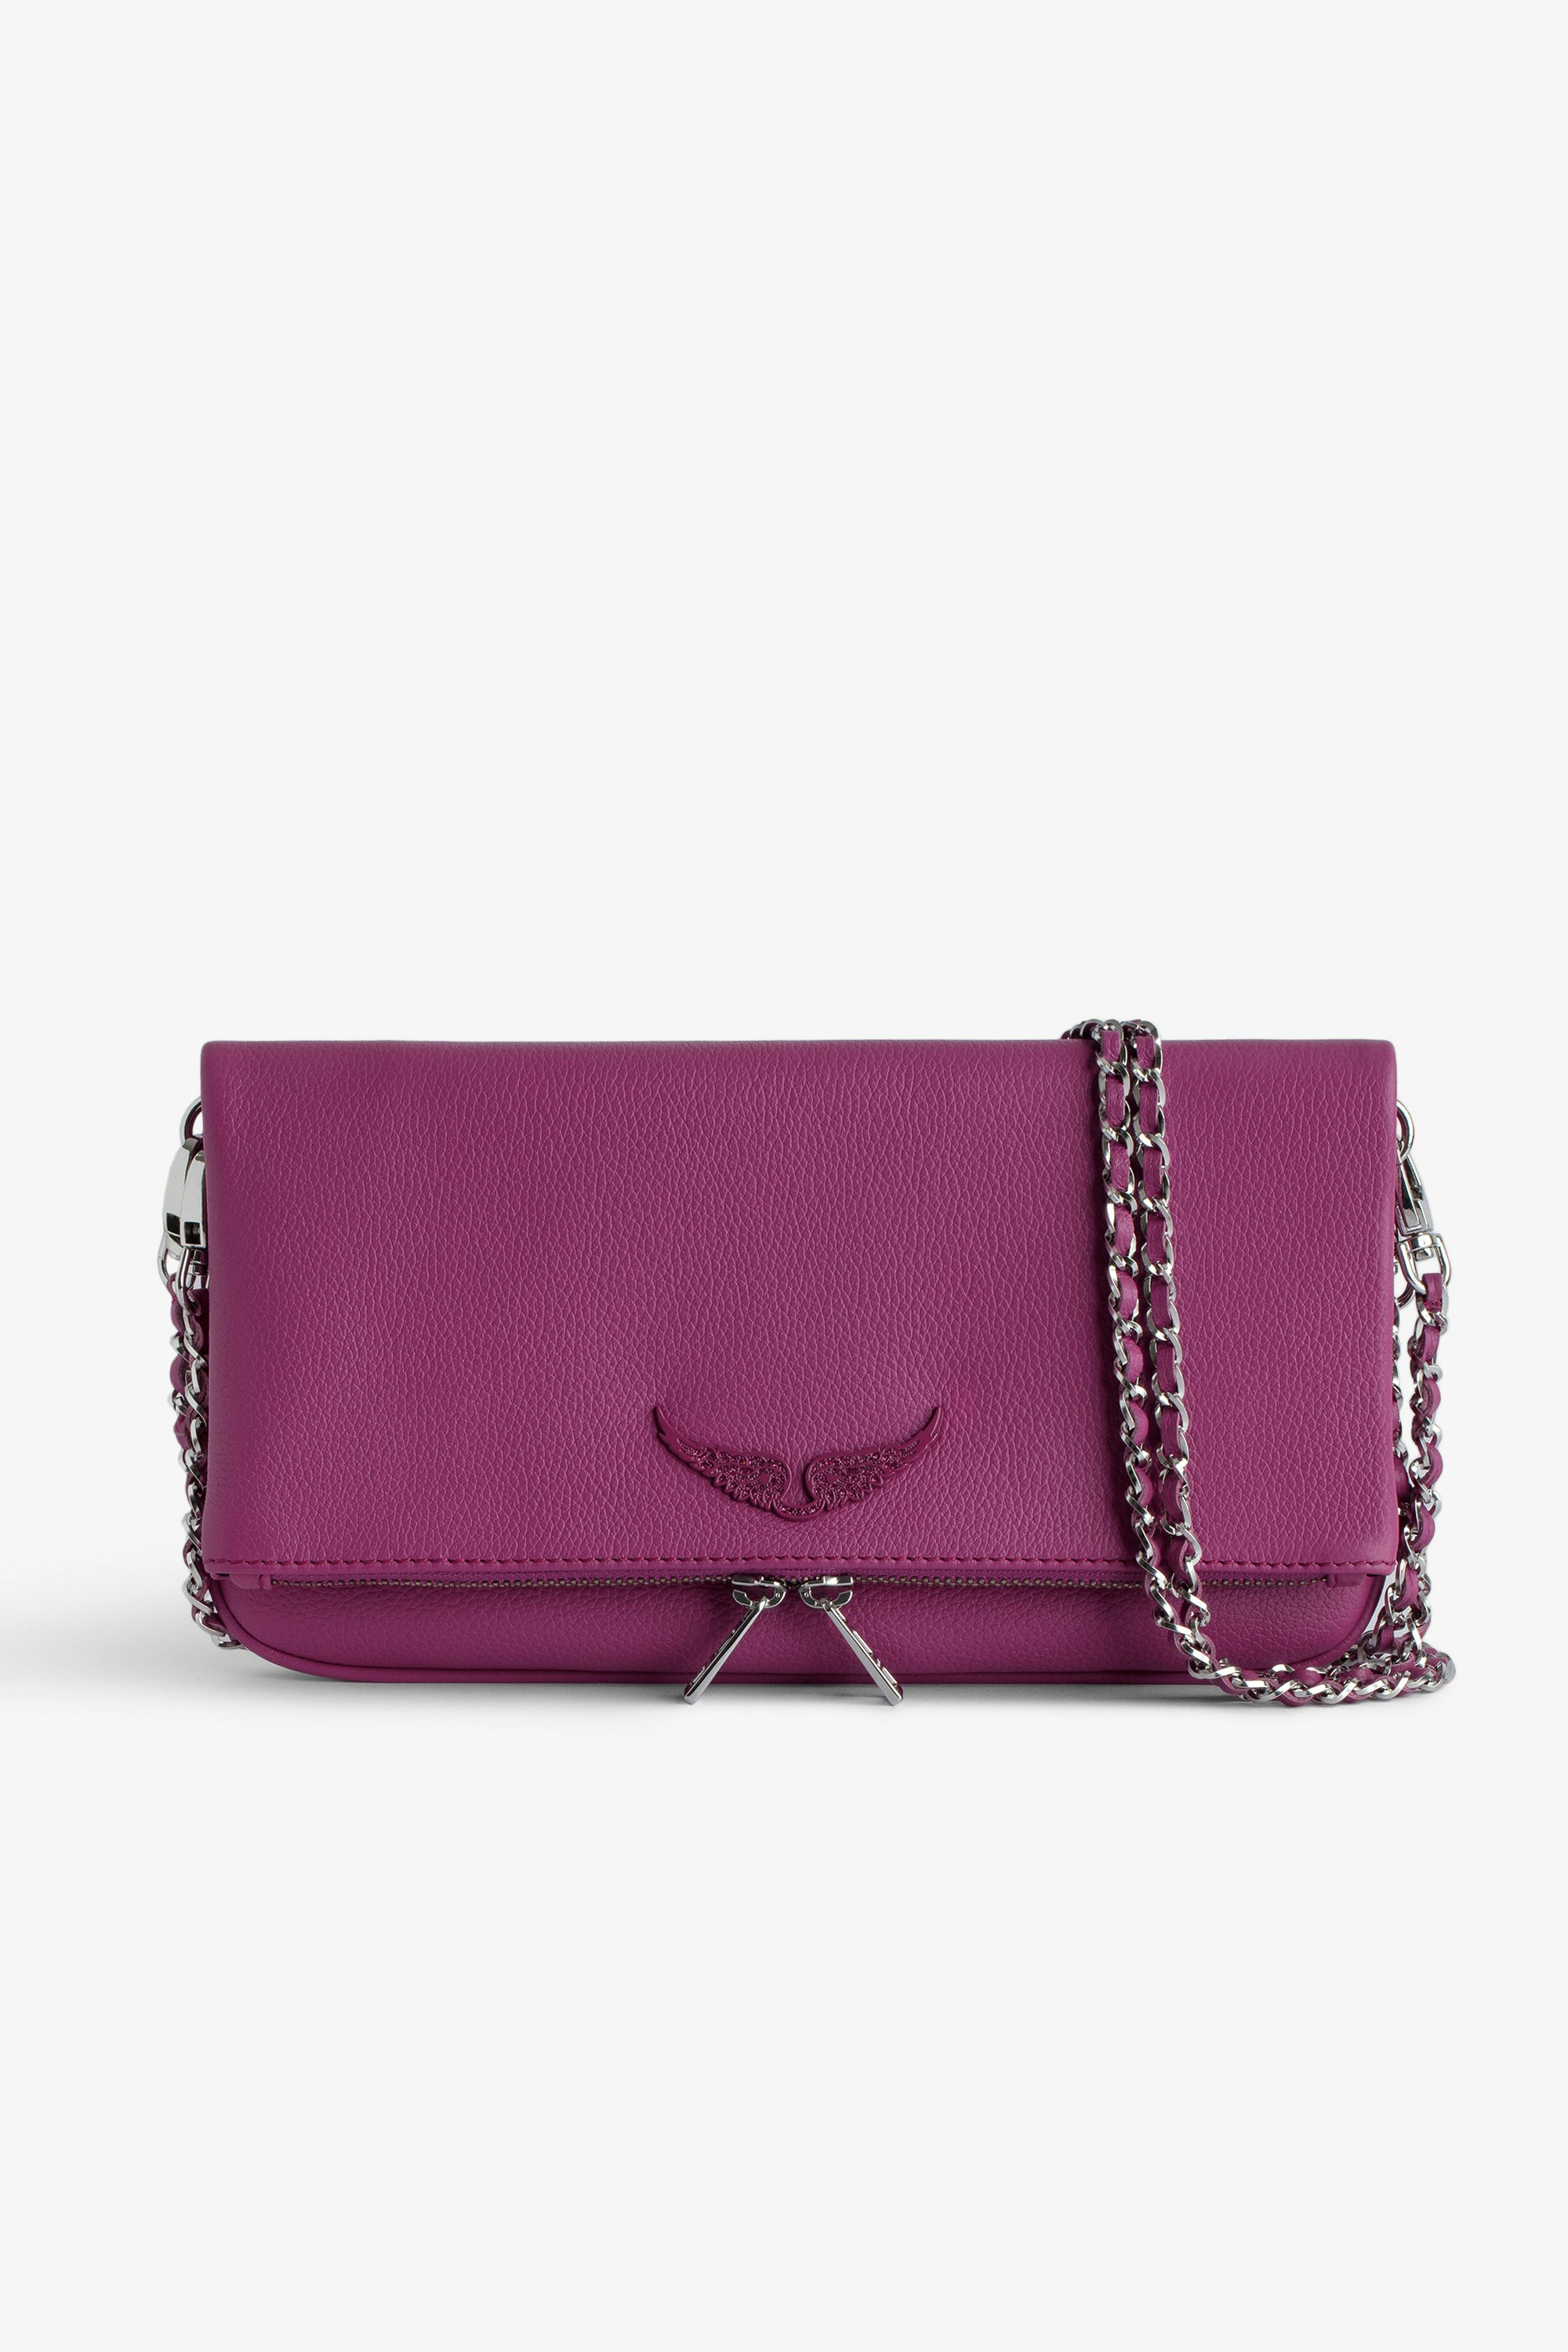 Rock Clutch - Women’s fuchsia grained leather clutch with double leather and metal chain strap.